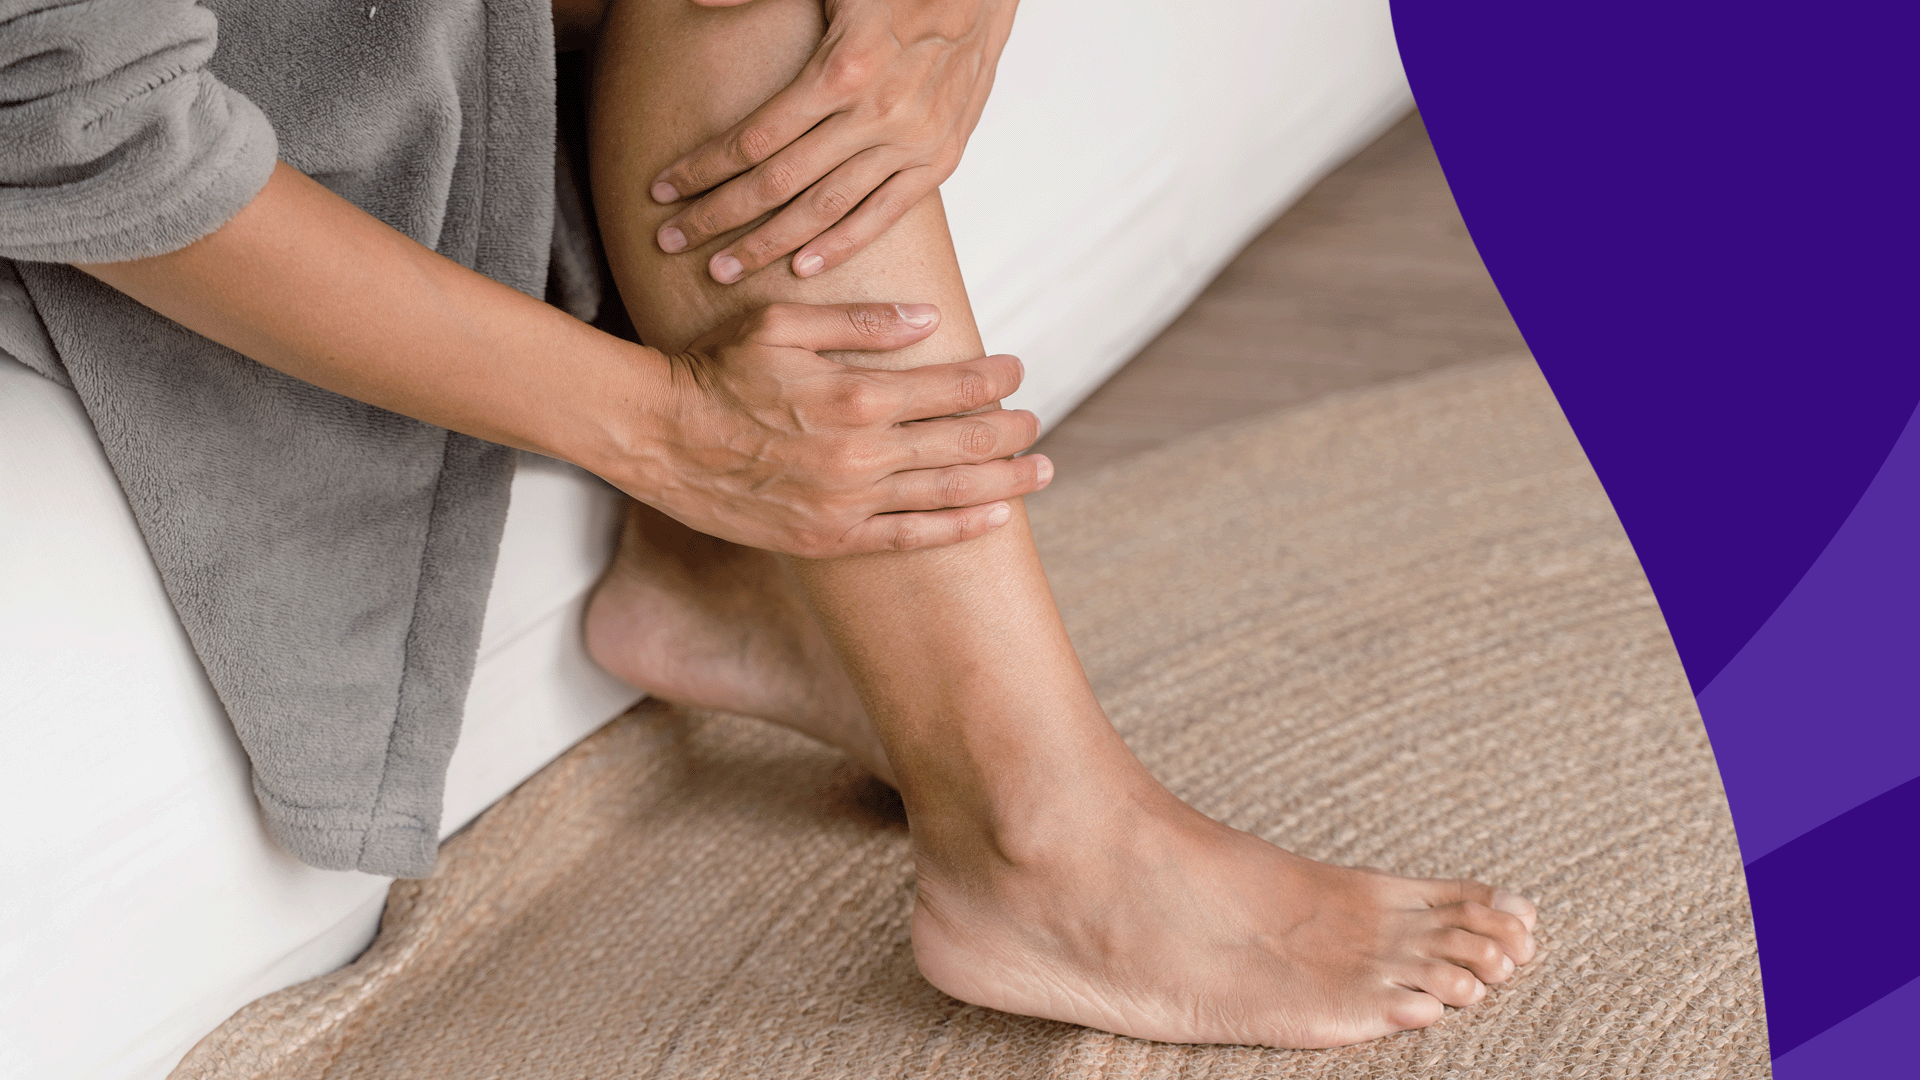 What causes swelling in only one leg? Related conditions and treatments